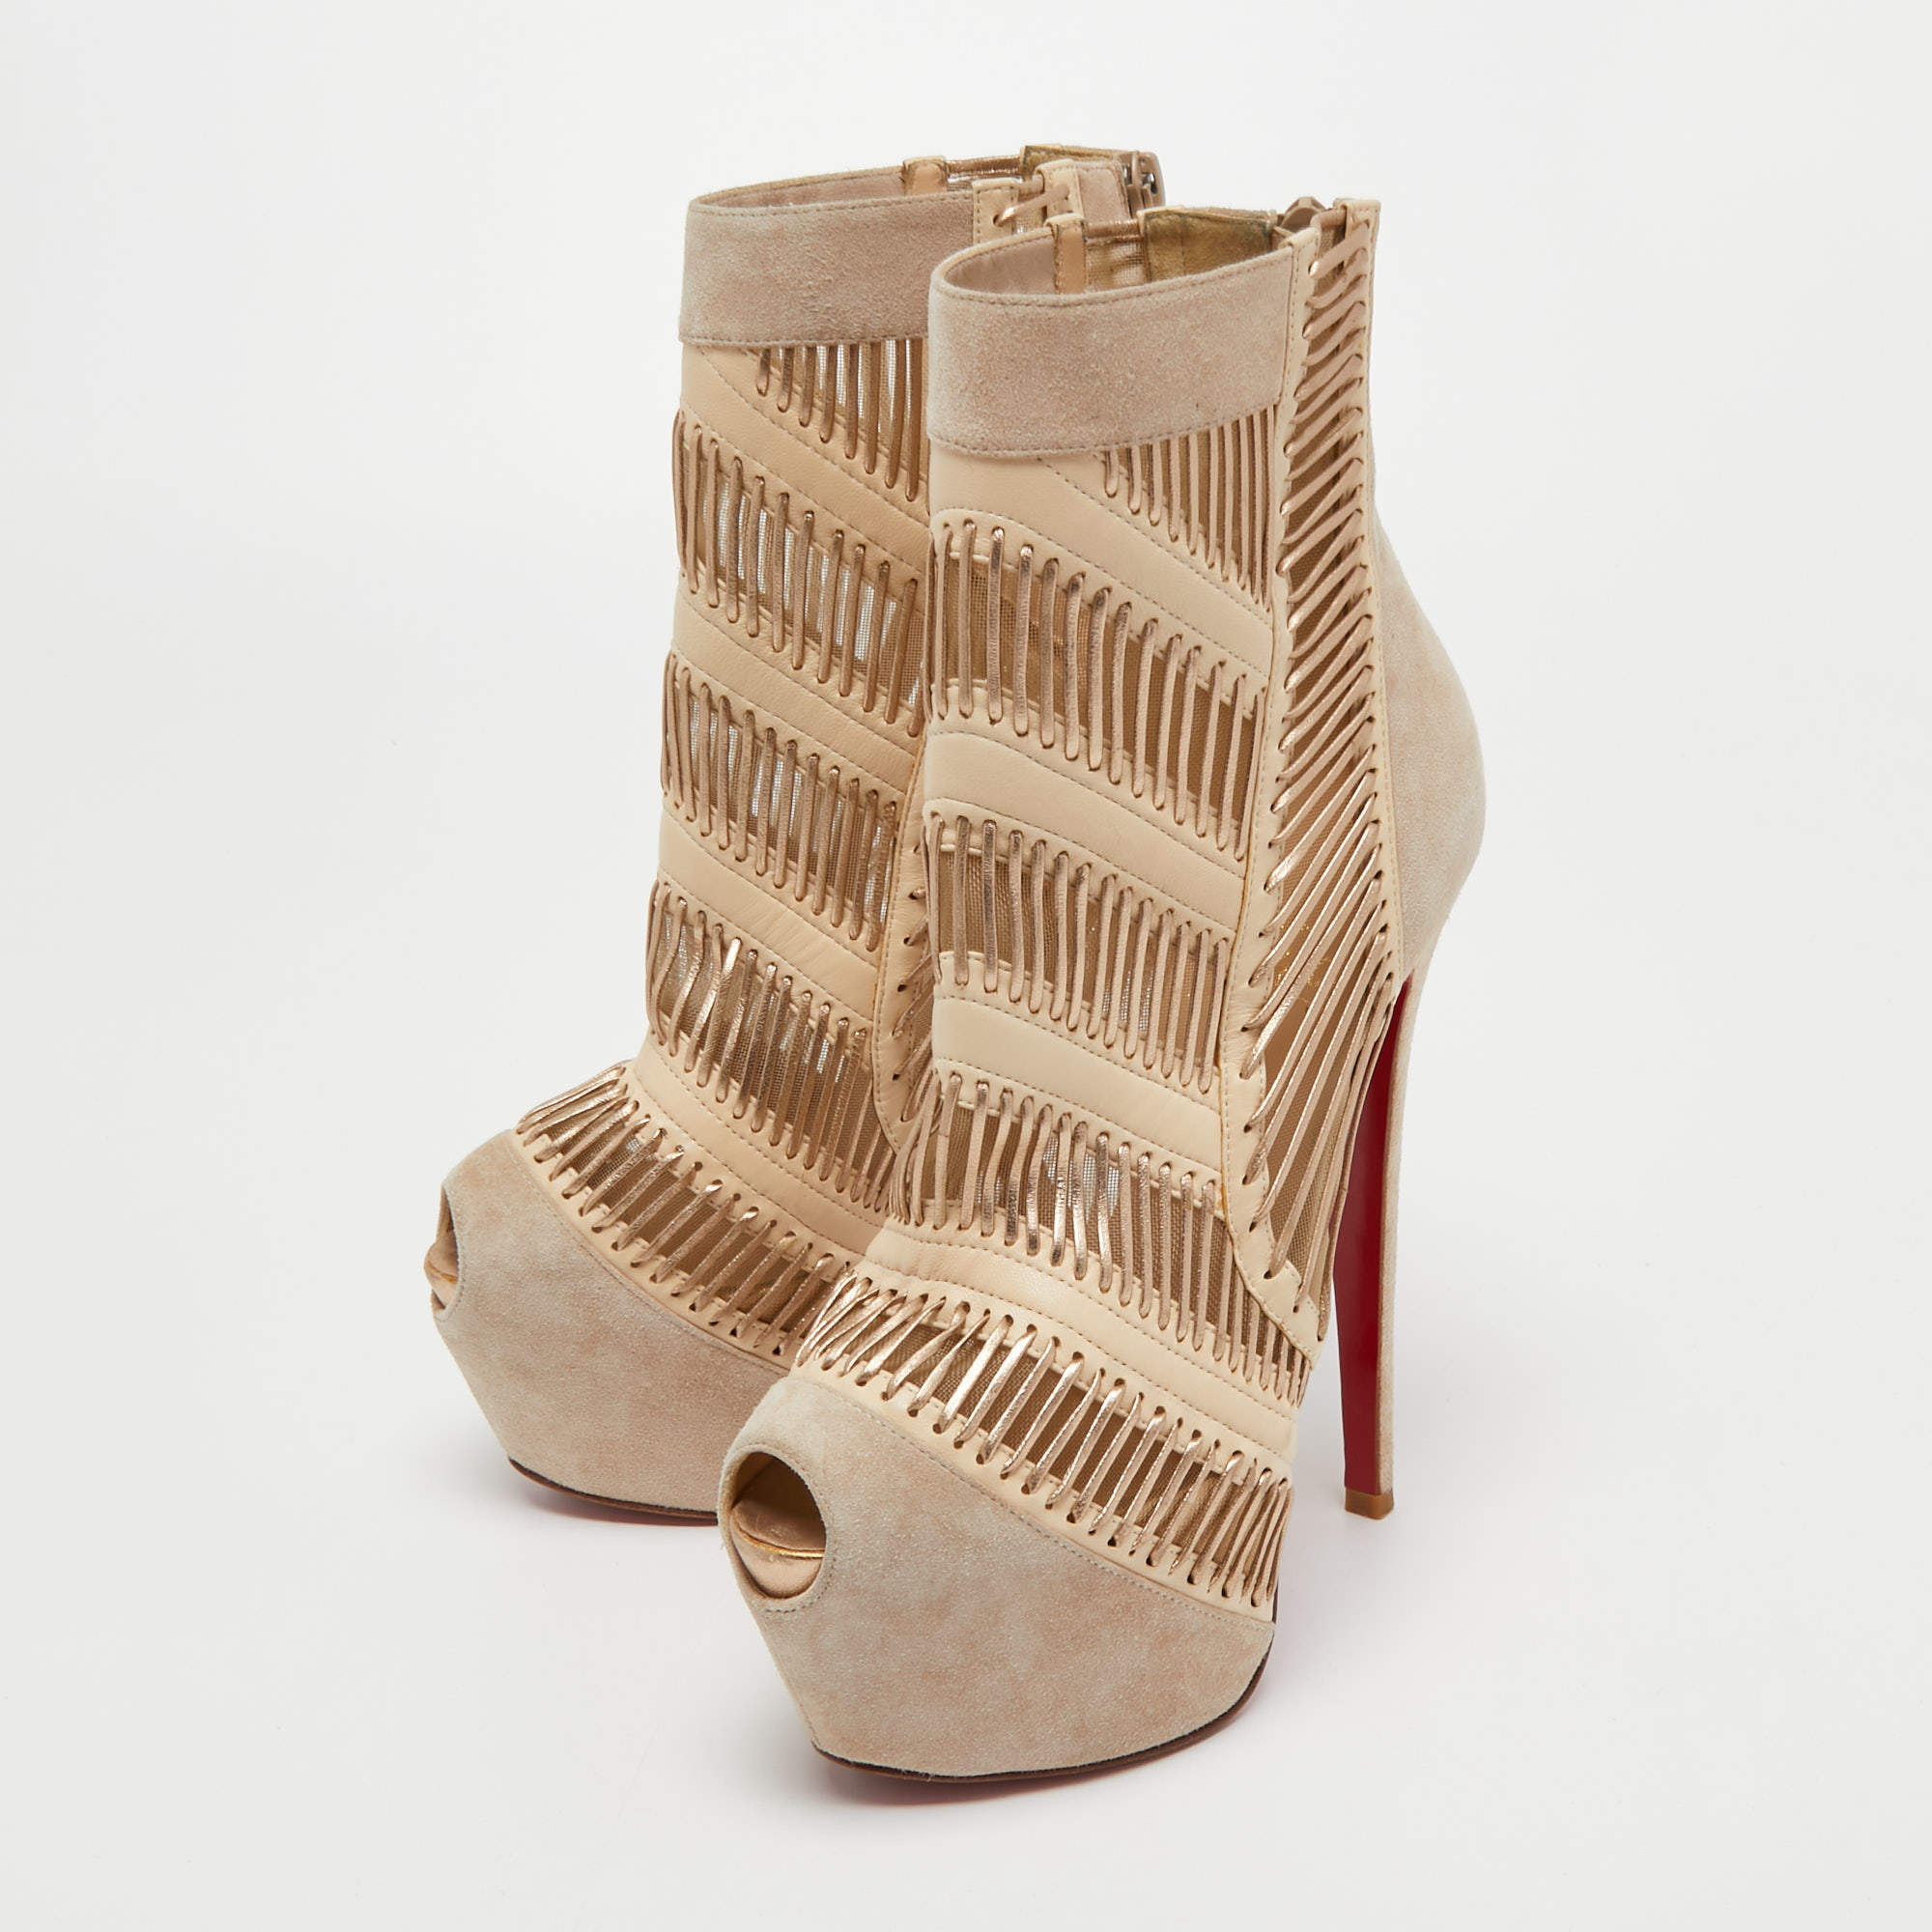 Christian Louboutin Suede and Leather Me Booties Size 37.5 Christian Louboutin TLC